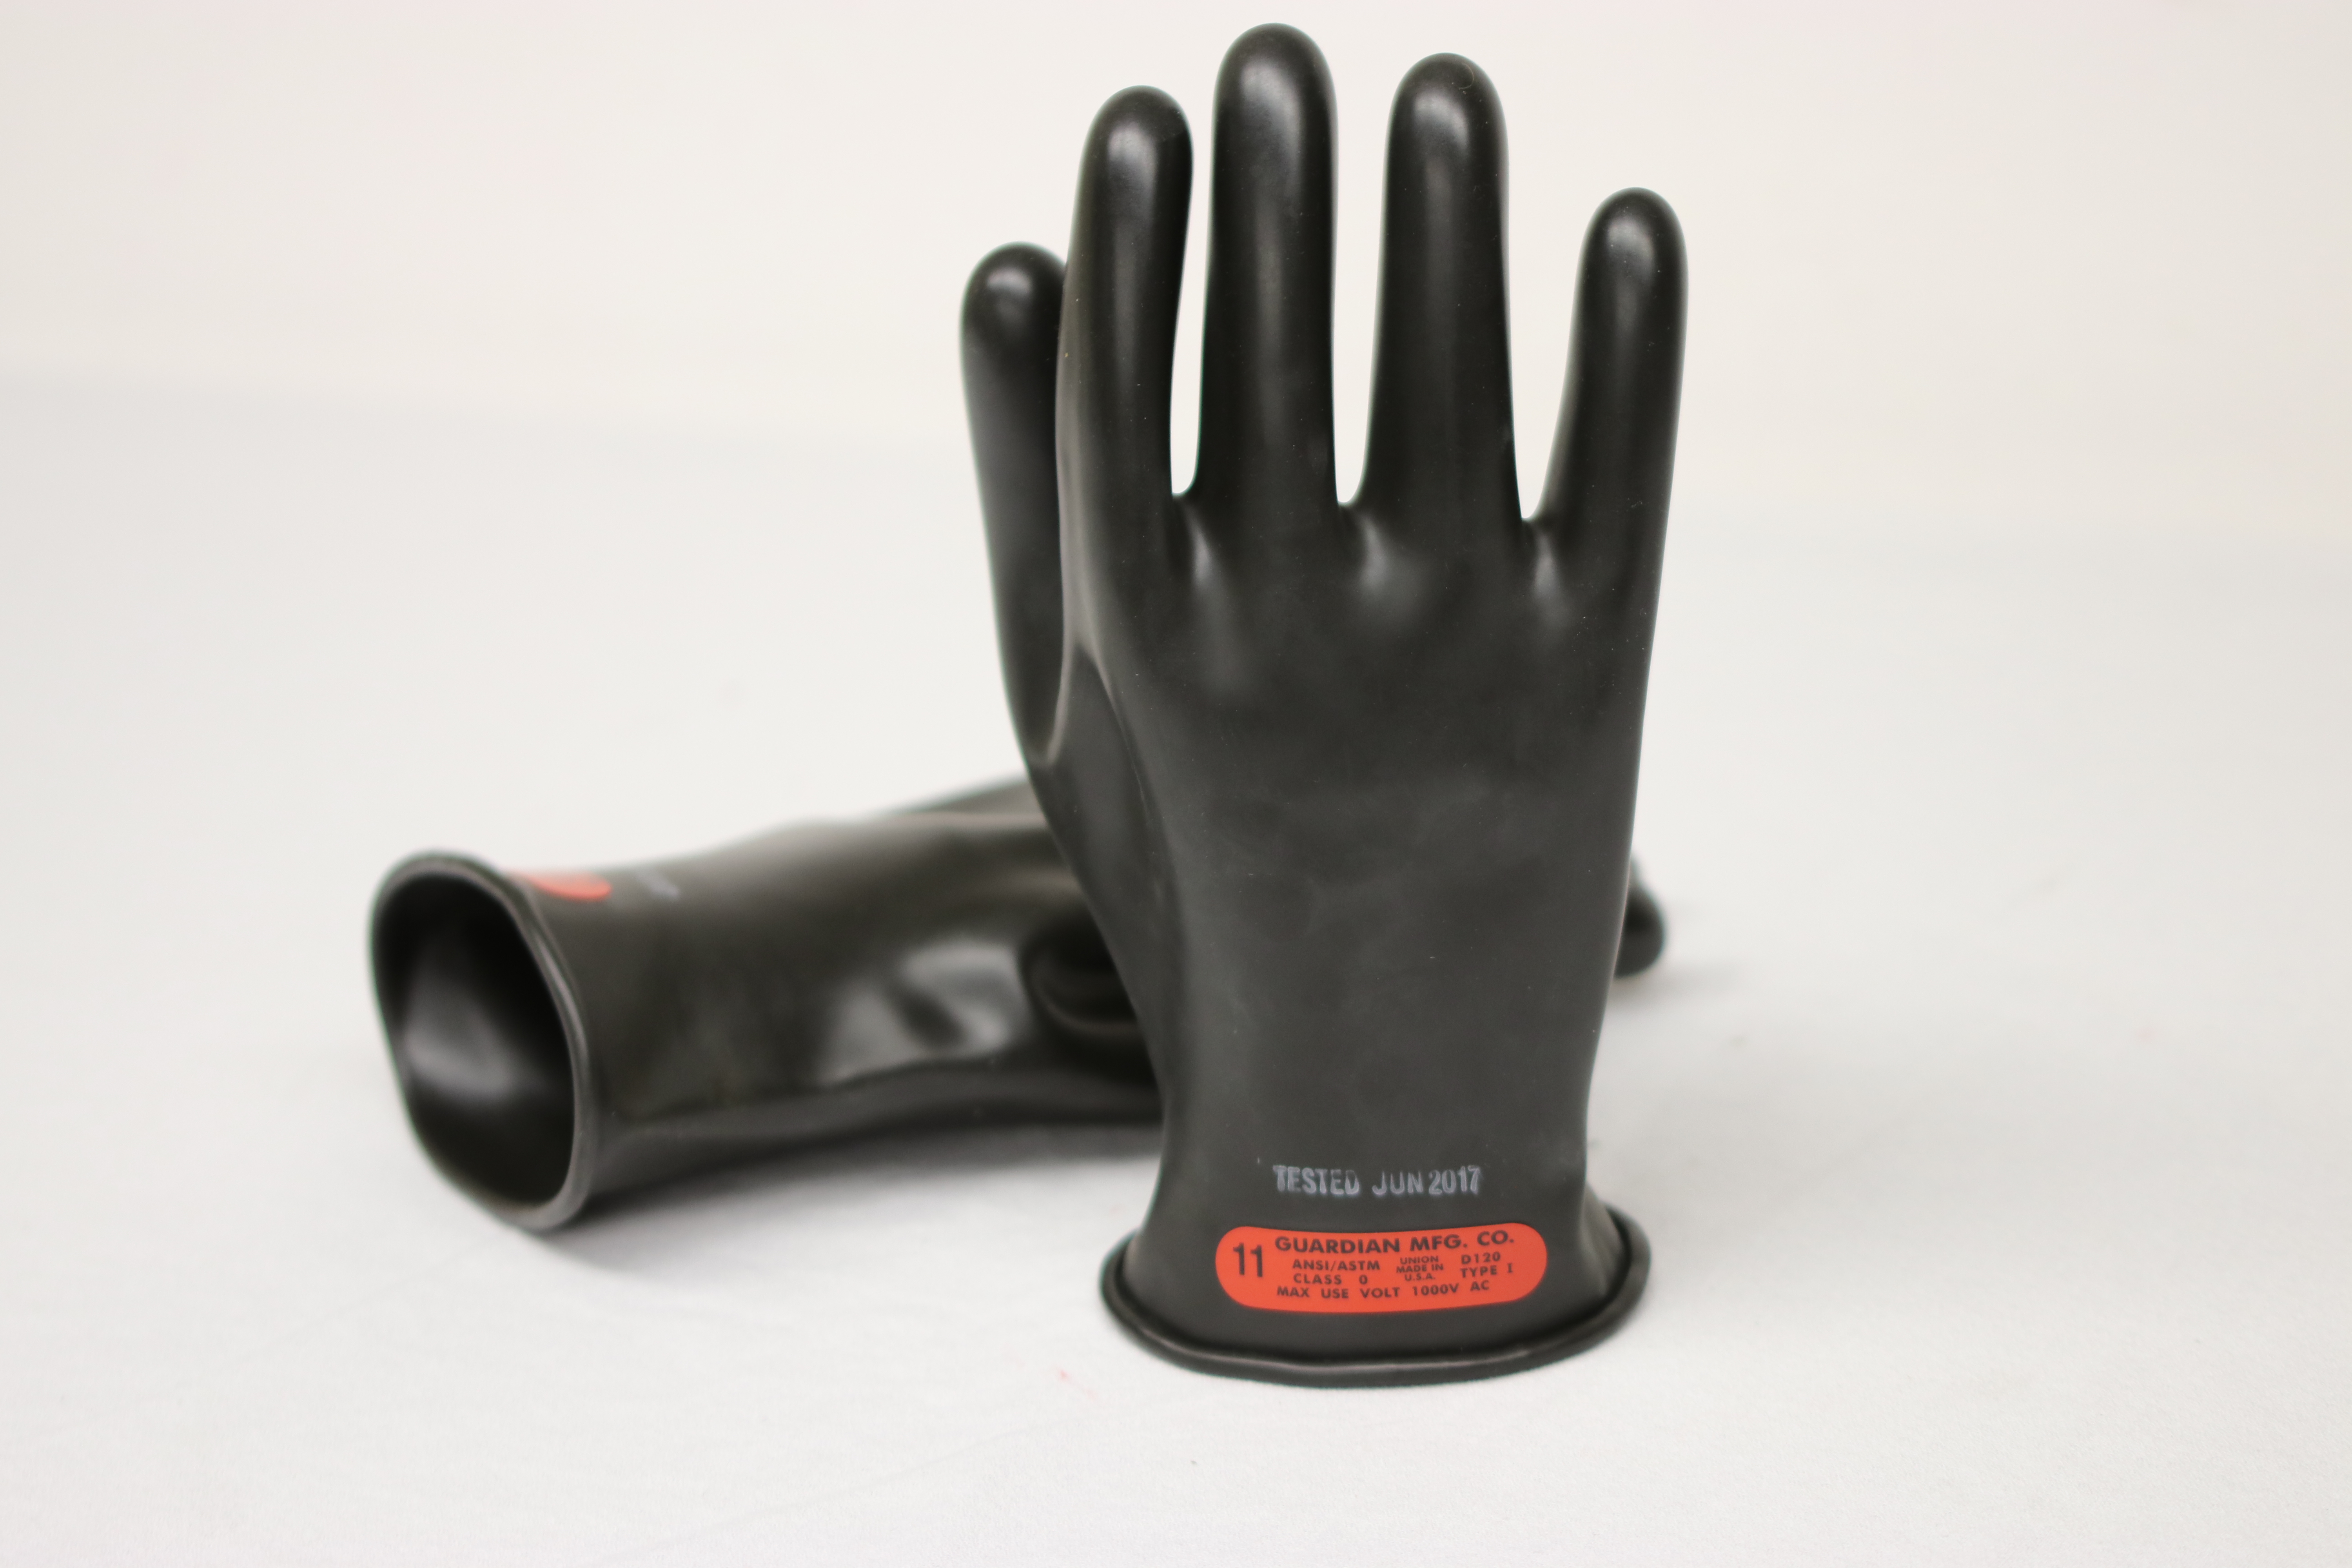 Magid M00 A.R.C Natural Latex Rubber Class 00 Insulating Glove with Straight Cuff Work Black 14 Length Size 8 One Pair